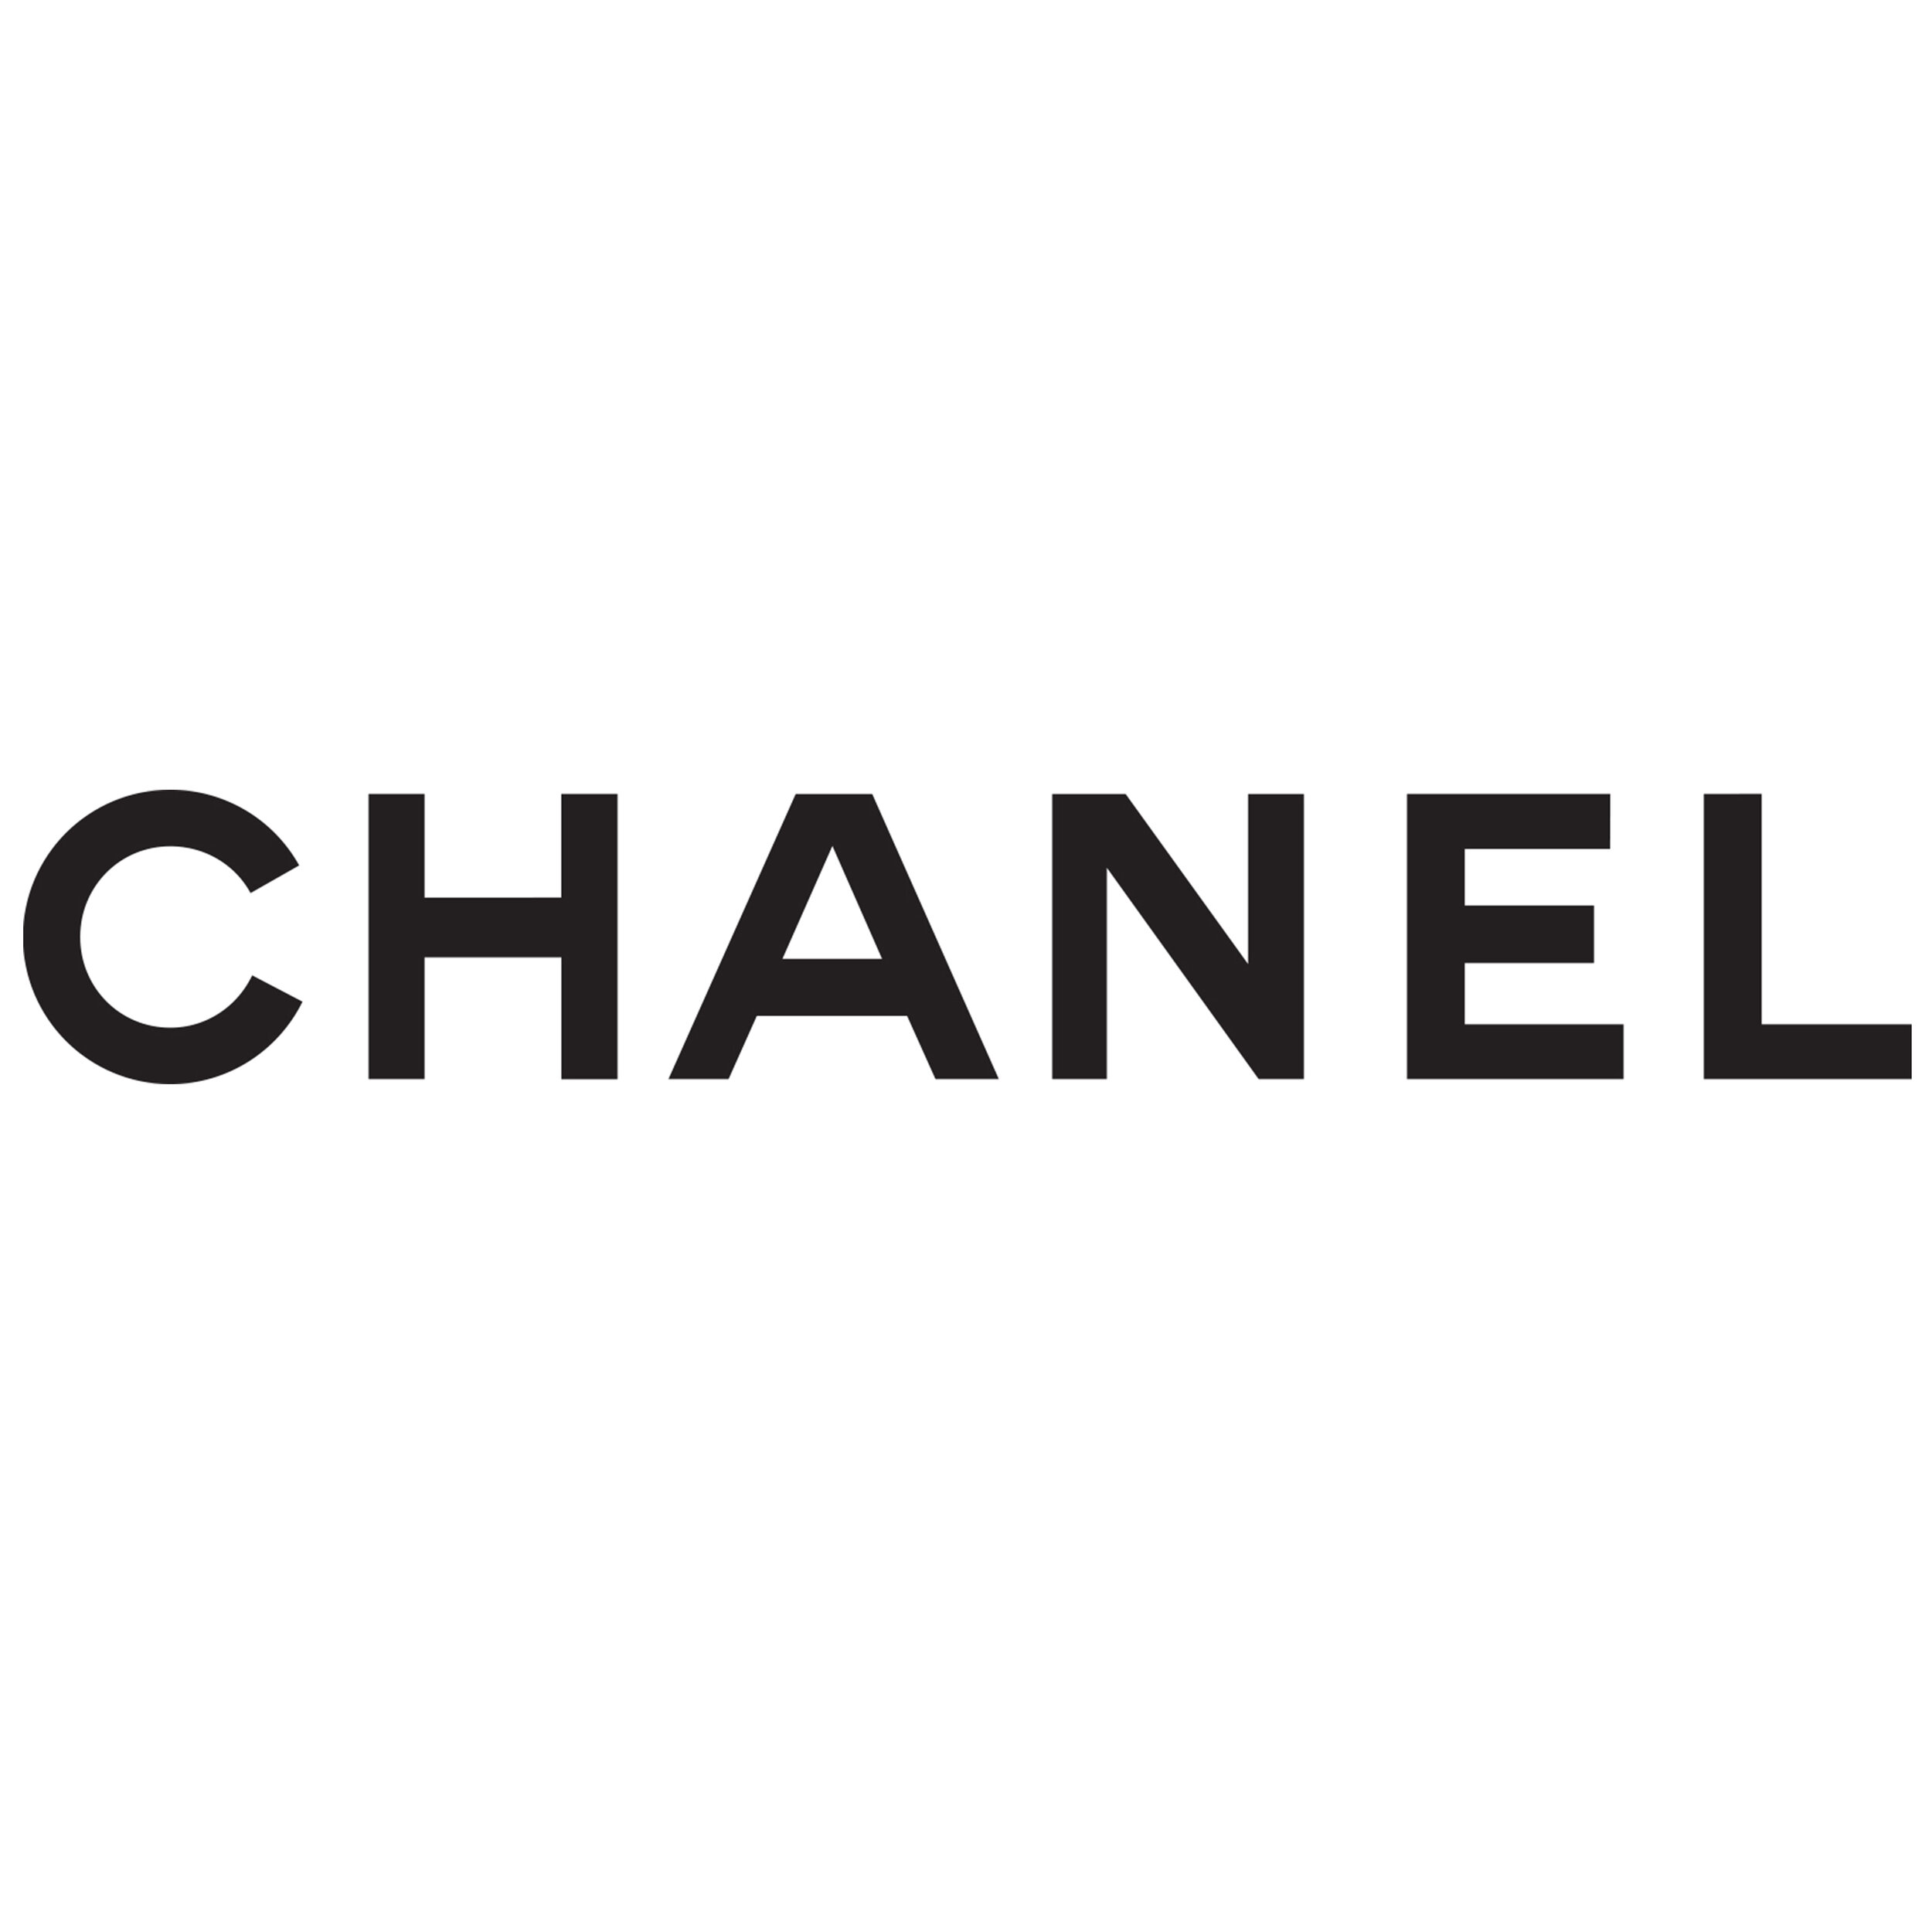 Chanel fitted.jpg